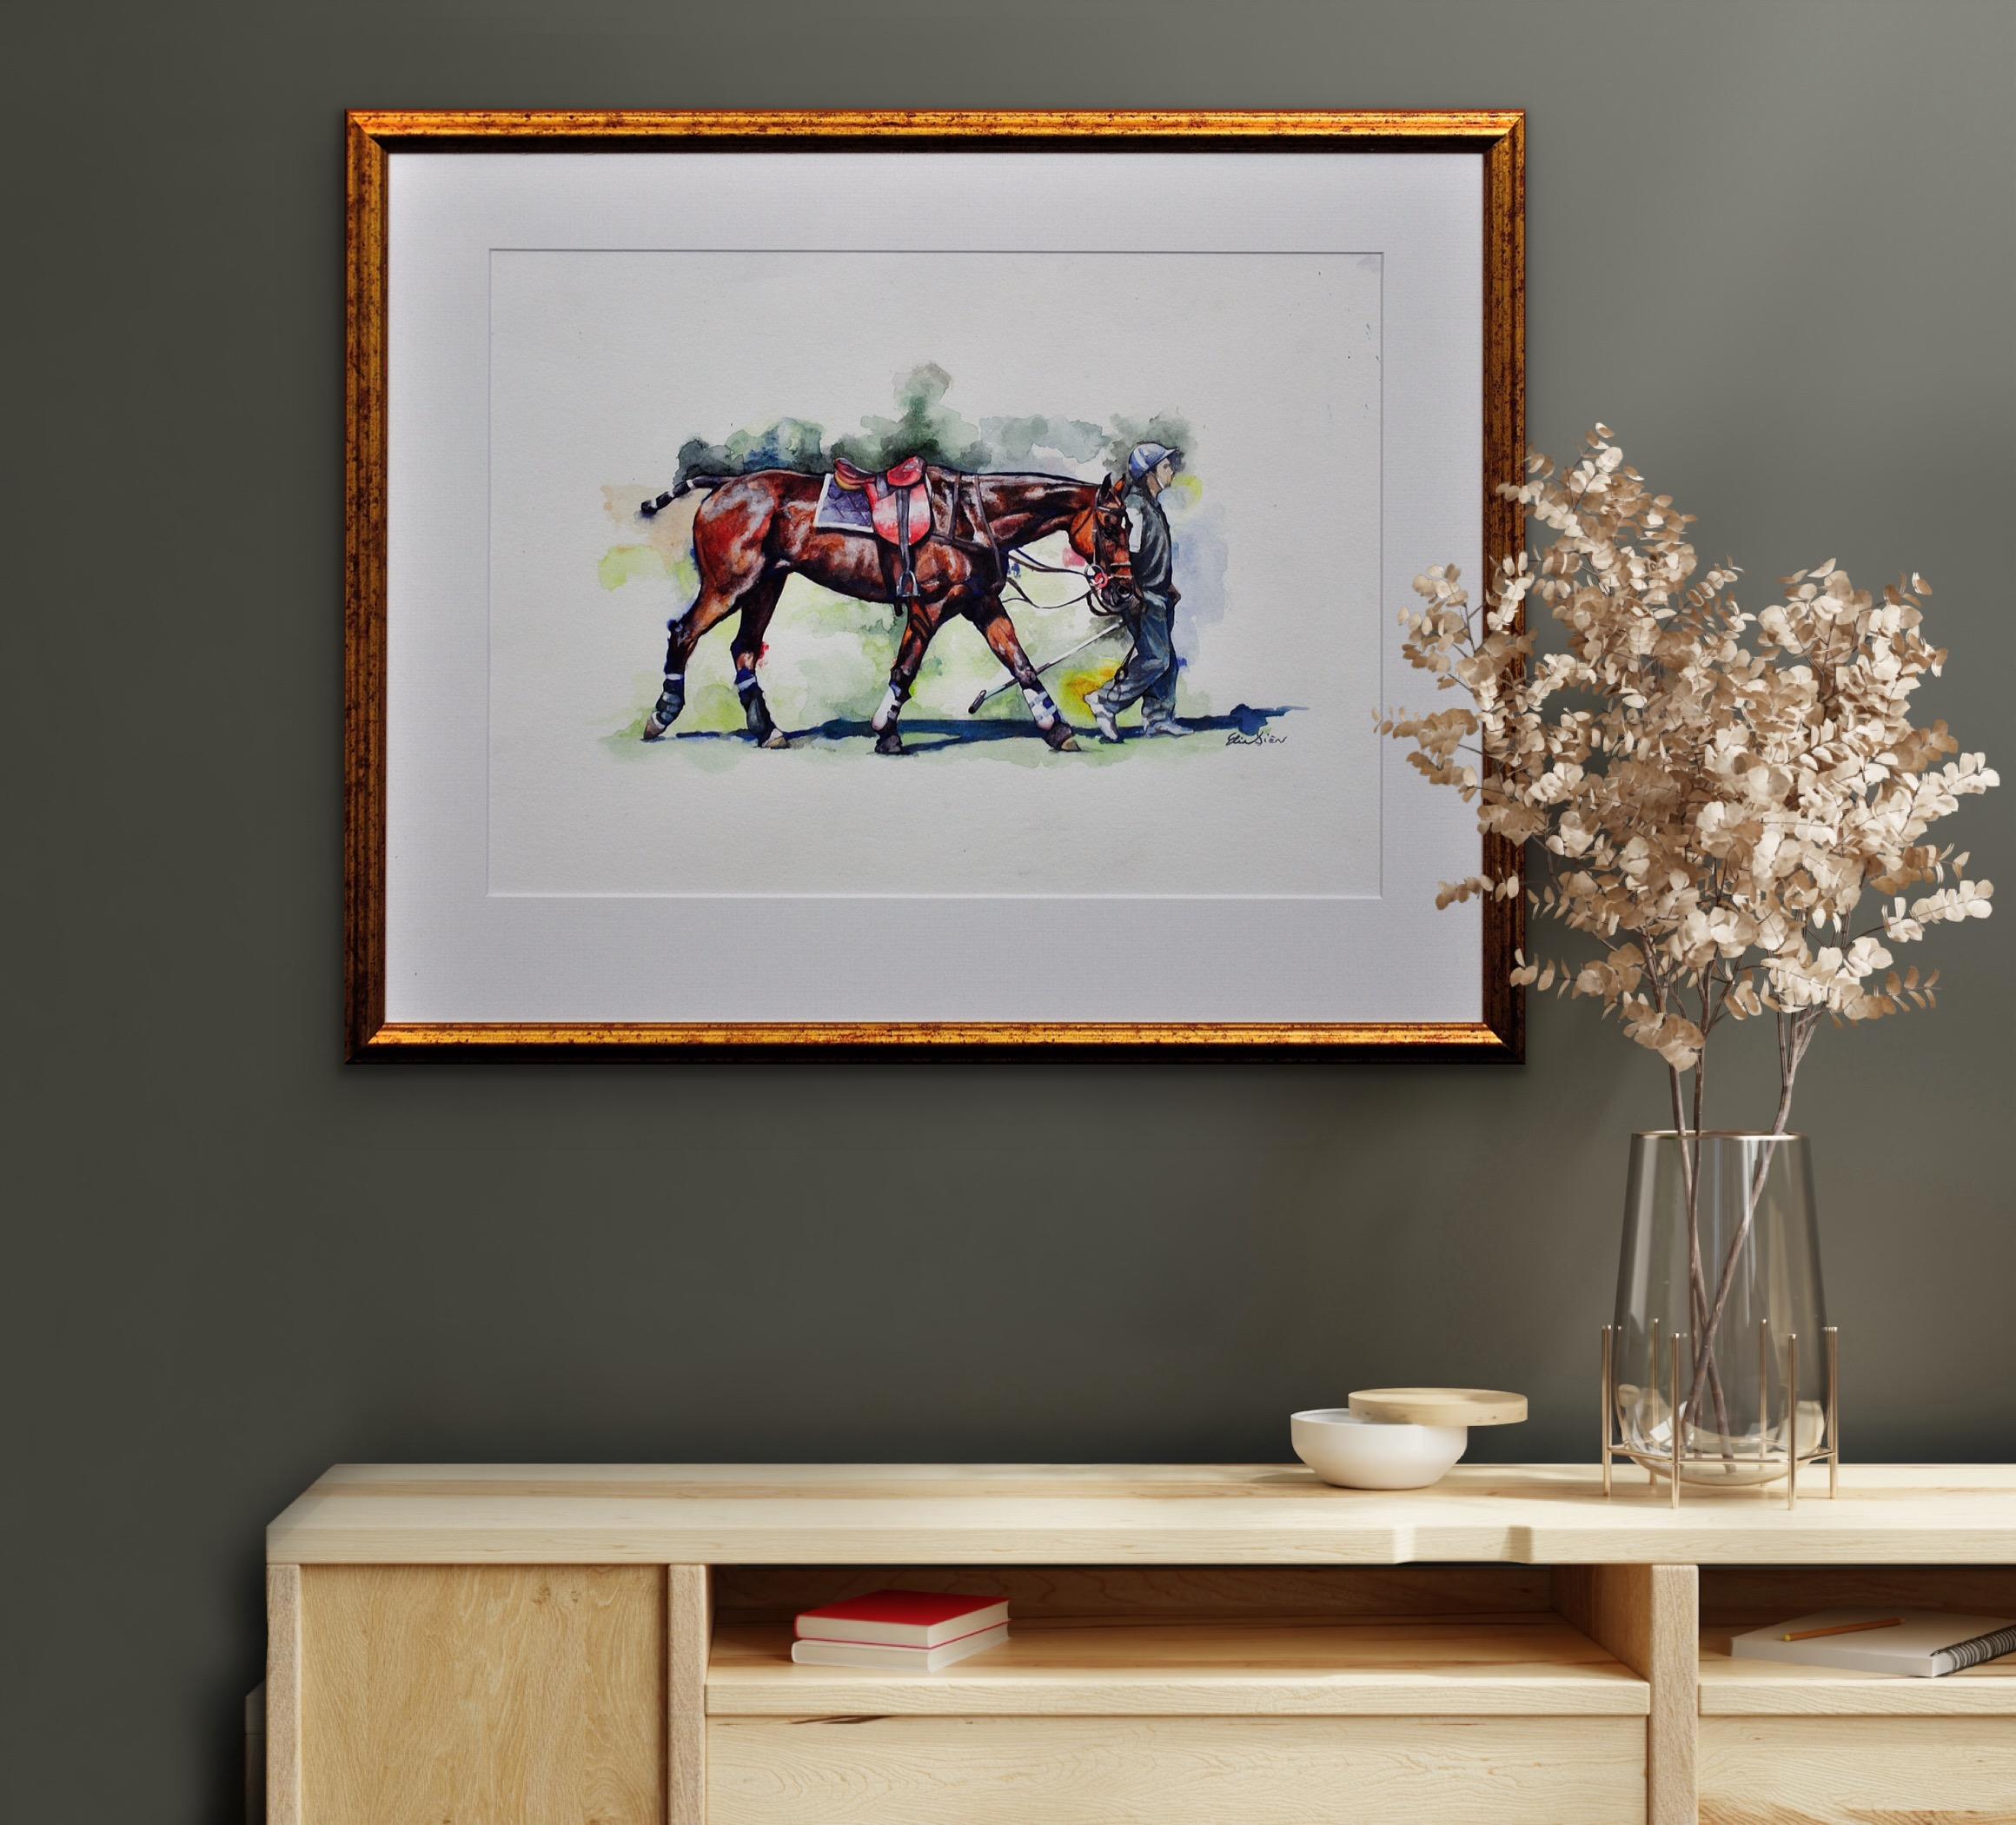 Polo Match, Cirencester, Player Leading Pony. Cotswolds. Framed Watercolor. For Sale 10